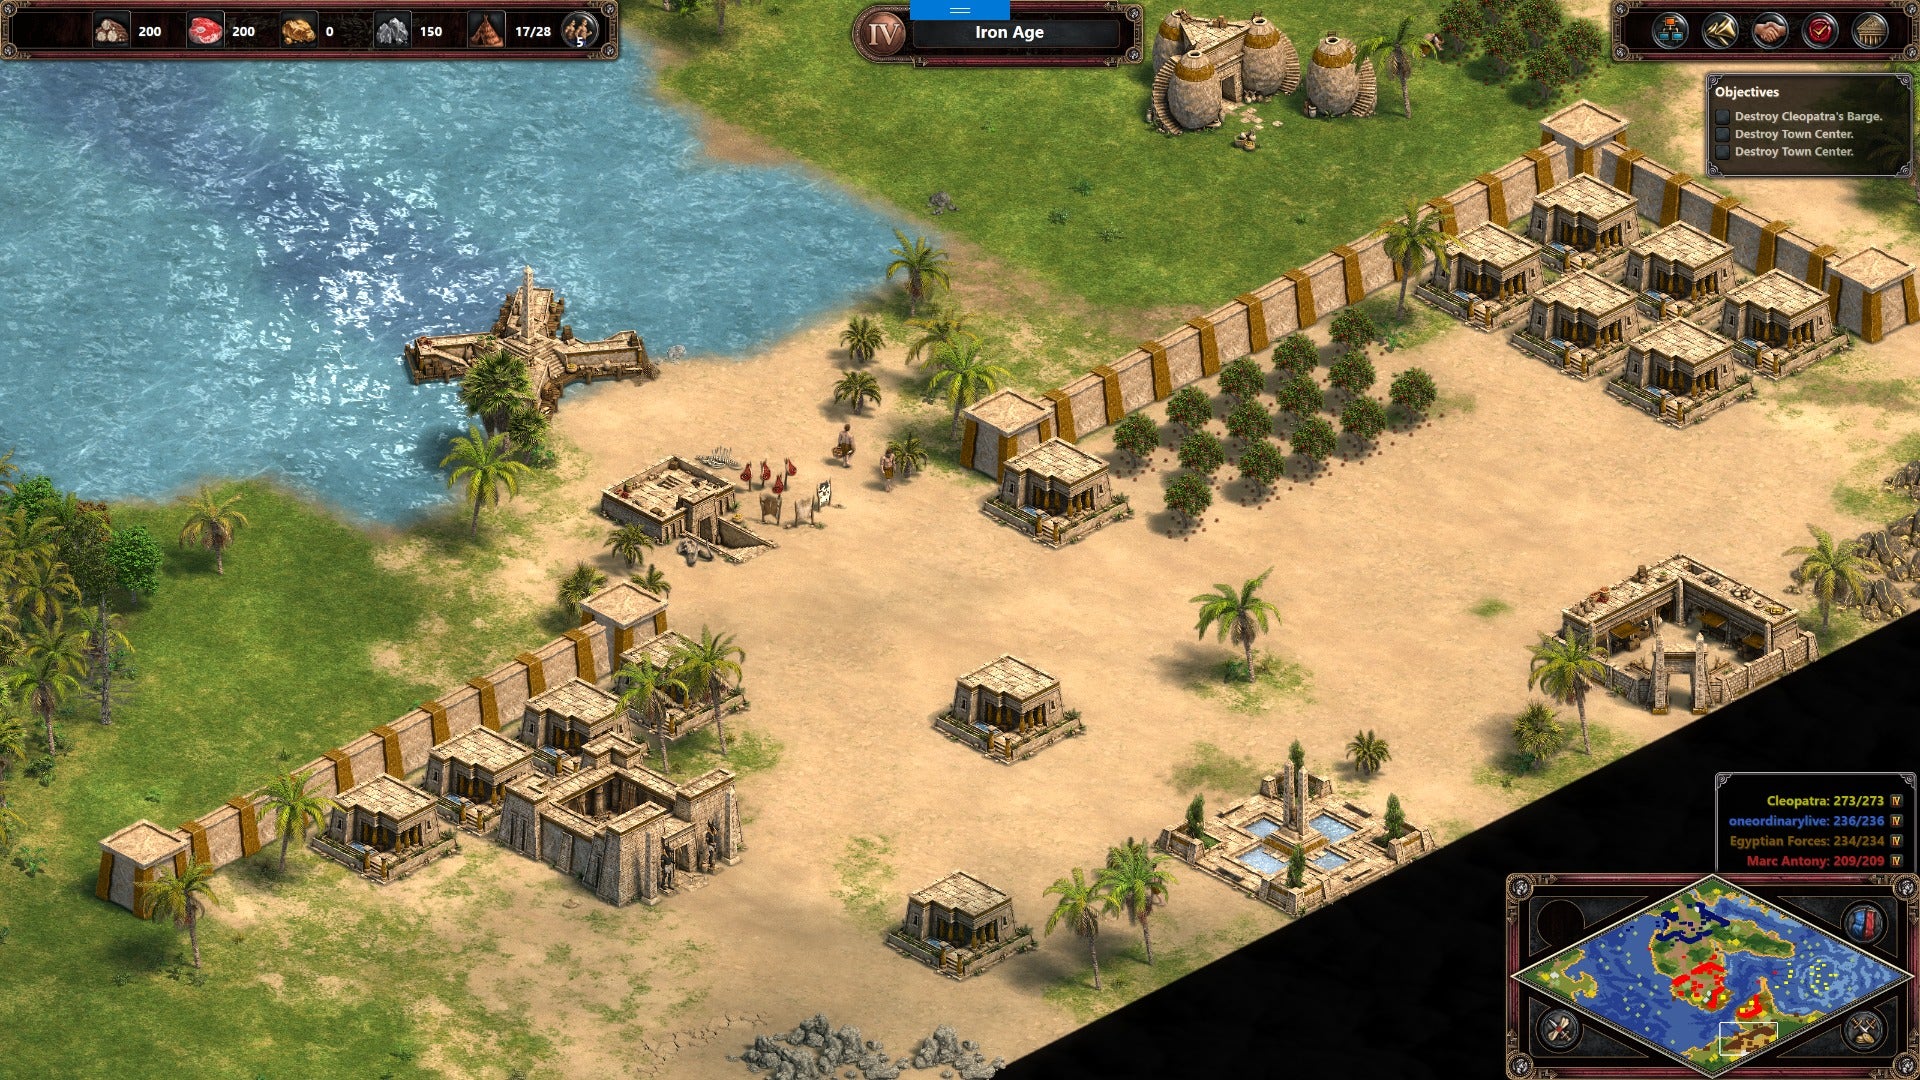 download age of empires 3 definitive edition